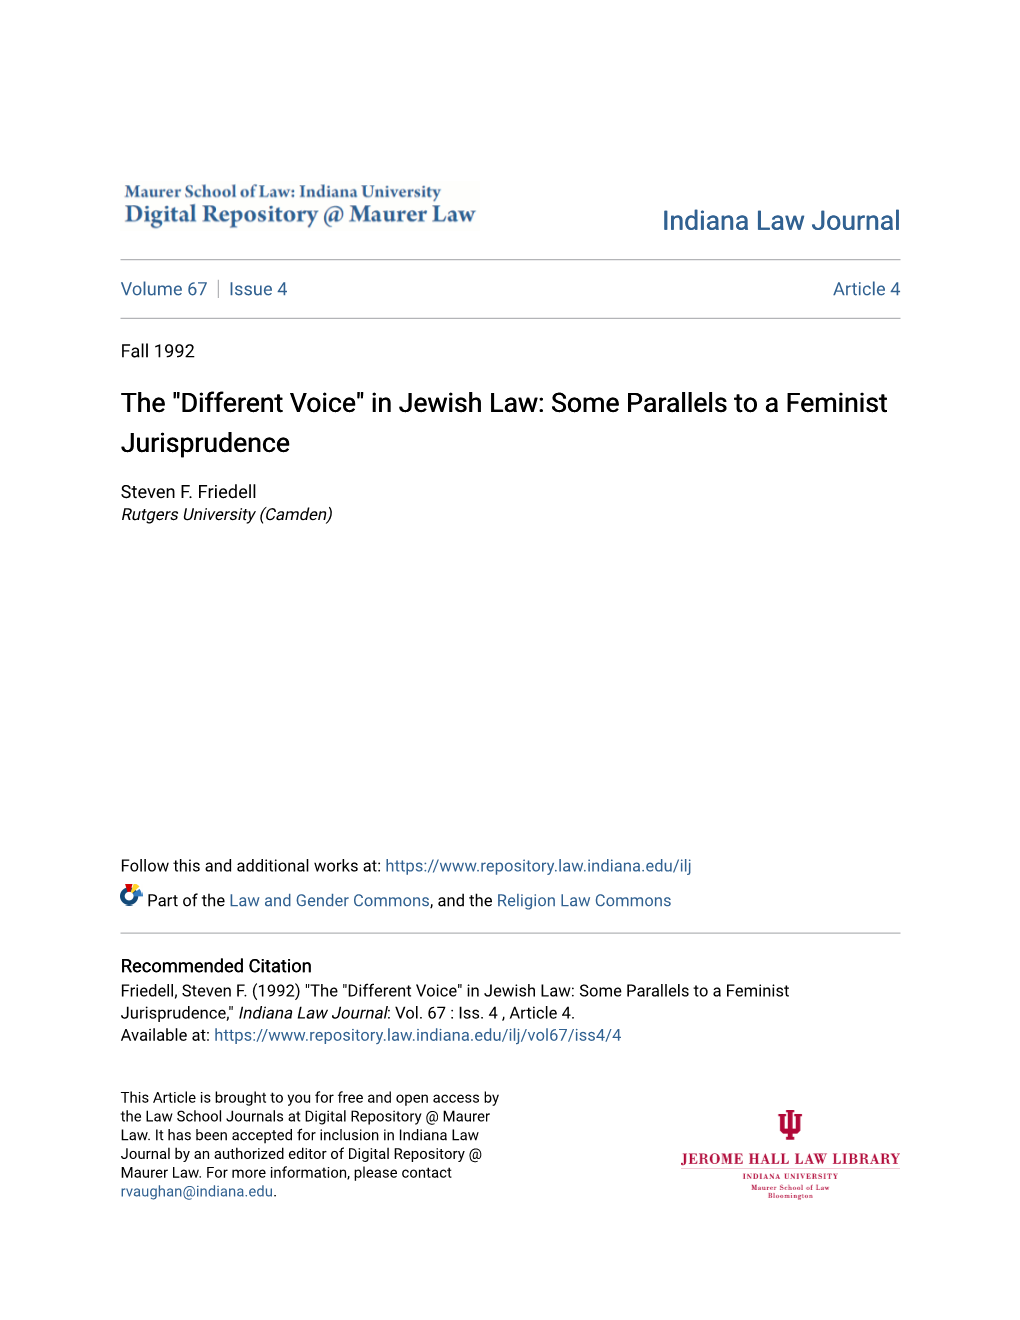 In Jewish Law: Some Parallels to a Feminist Jurisprudence